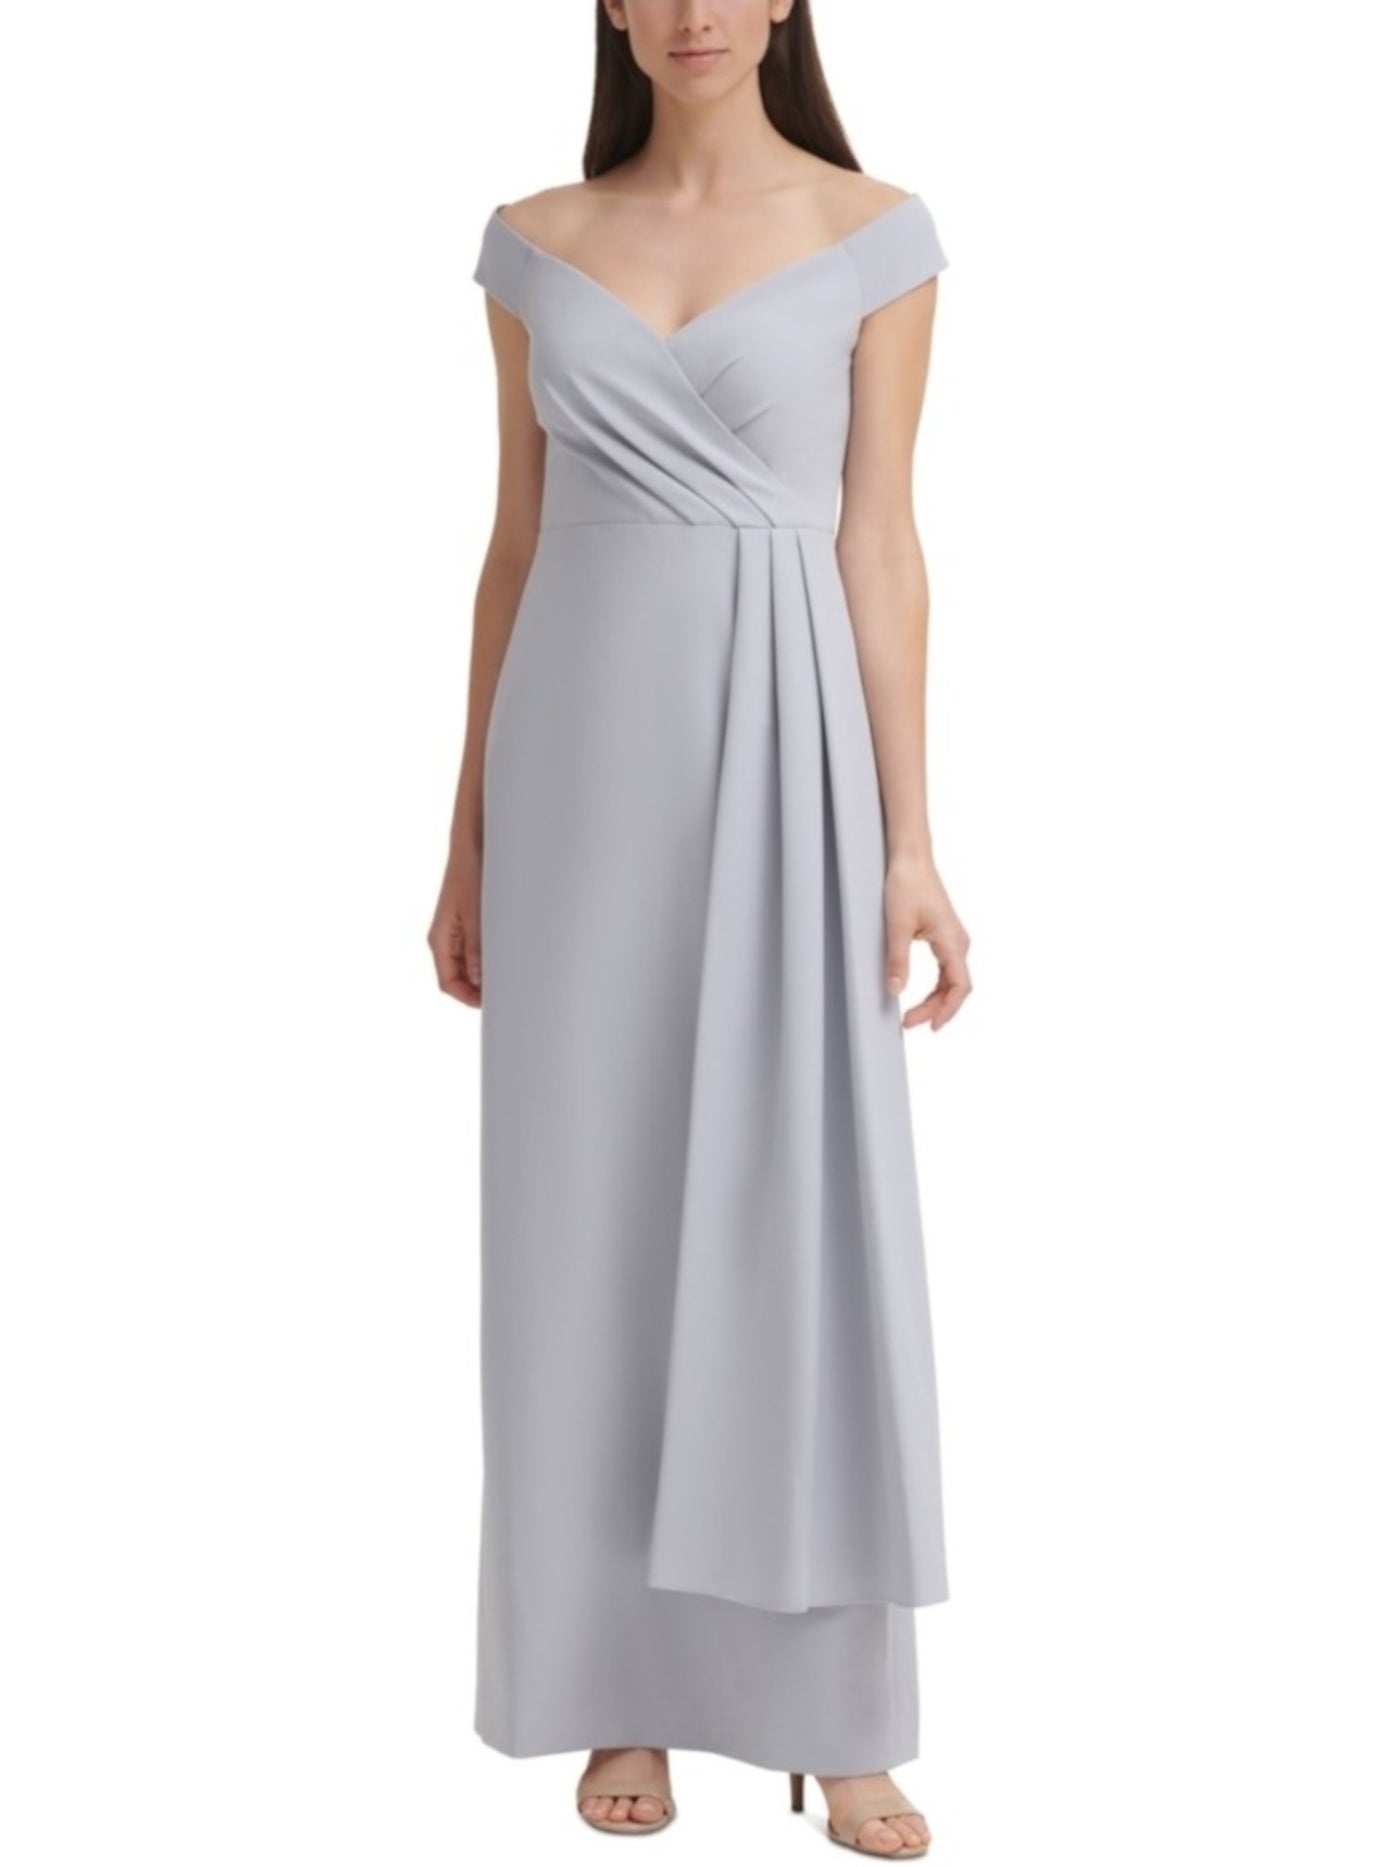 ELIZA J Womens Gray Stretch Zippered Pleated Side-drape Cap Sleeve Off Shoulder Full-Length Formal Gown Dress 14